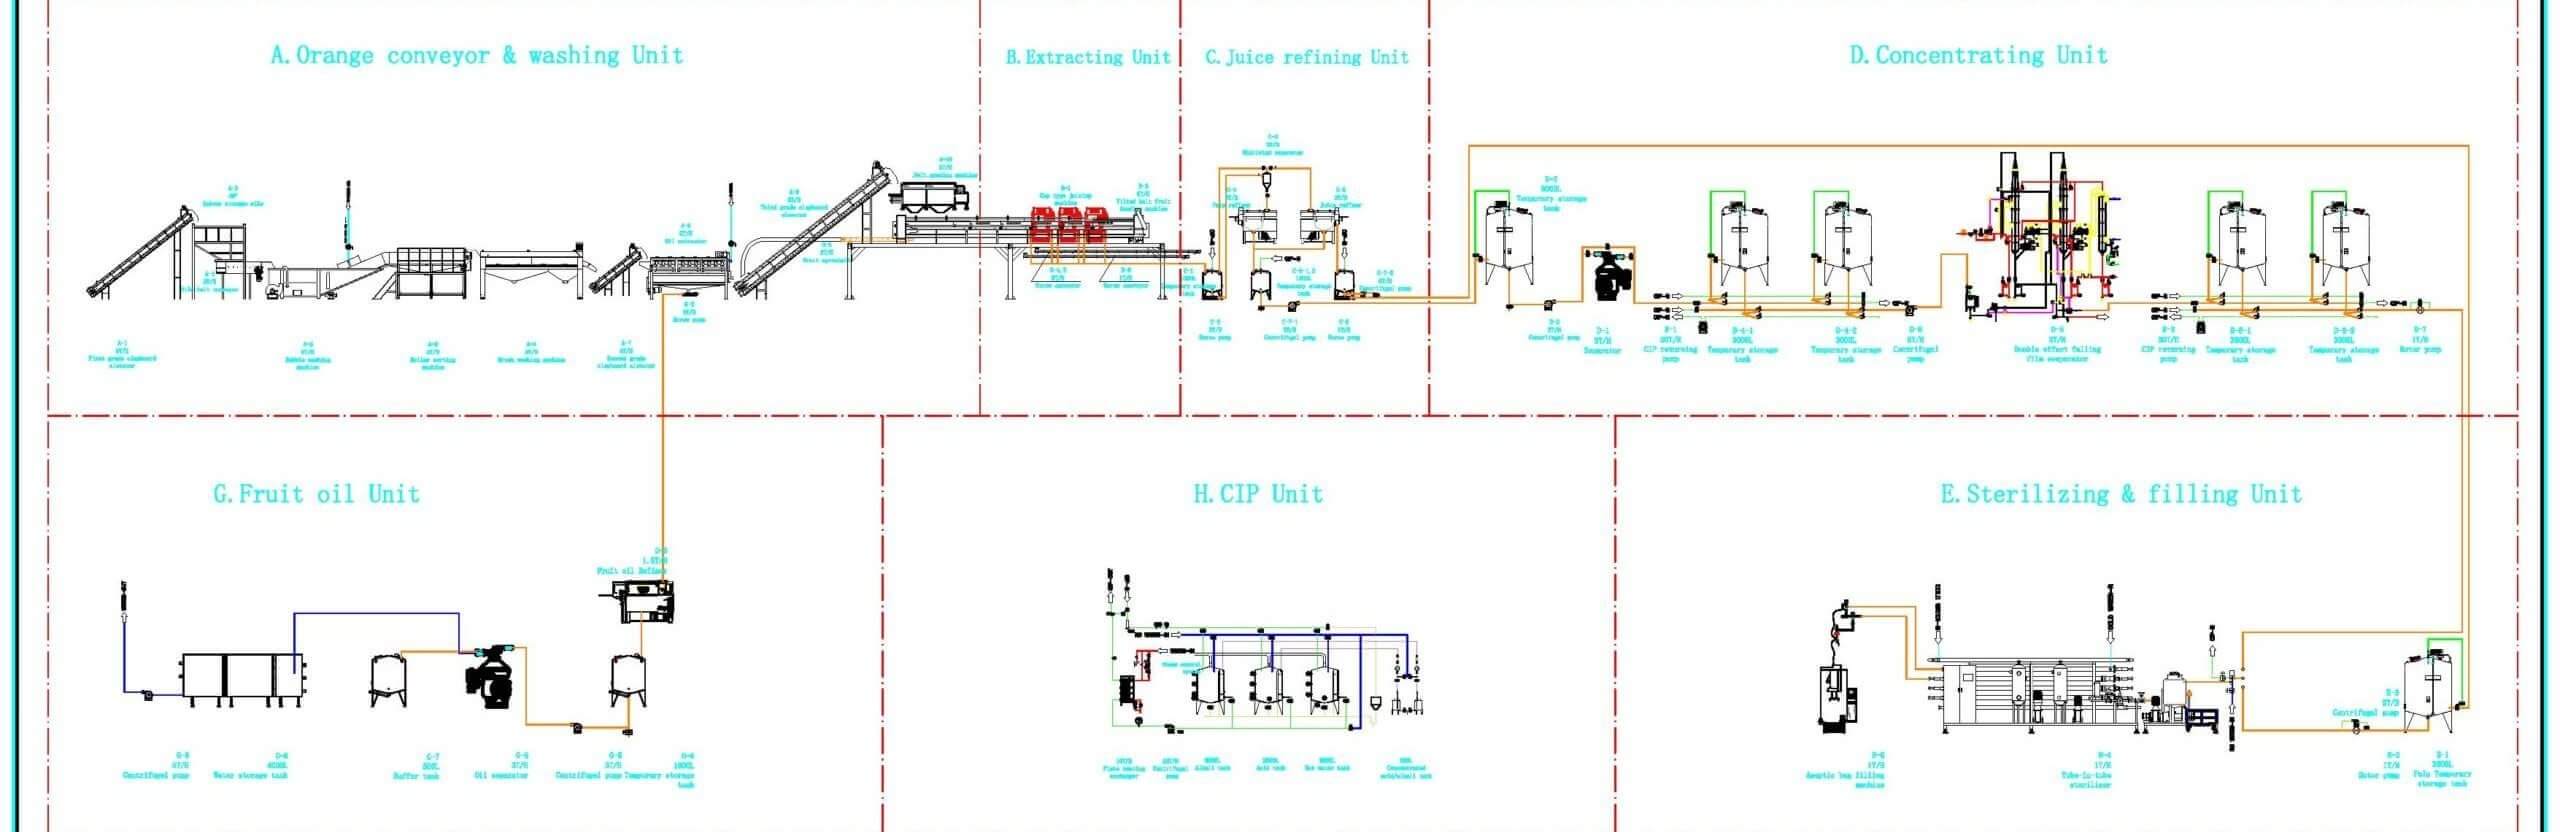 concentrated ornage juice processing processing machine flowchart